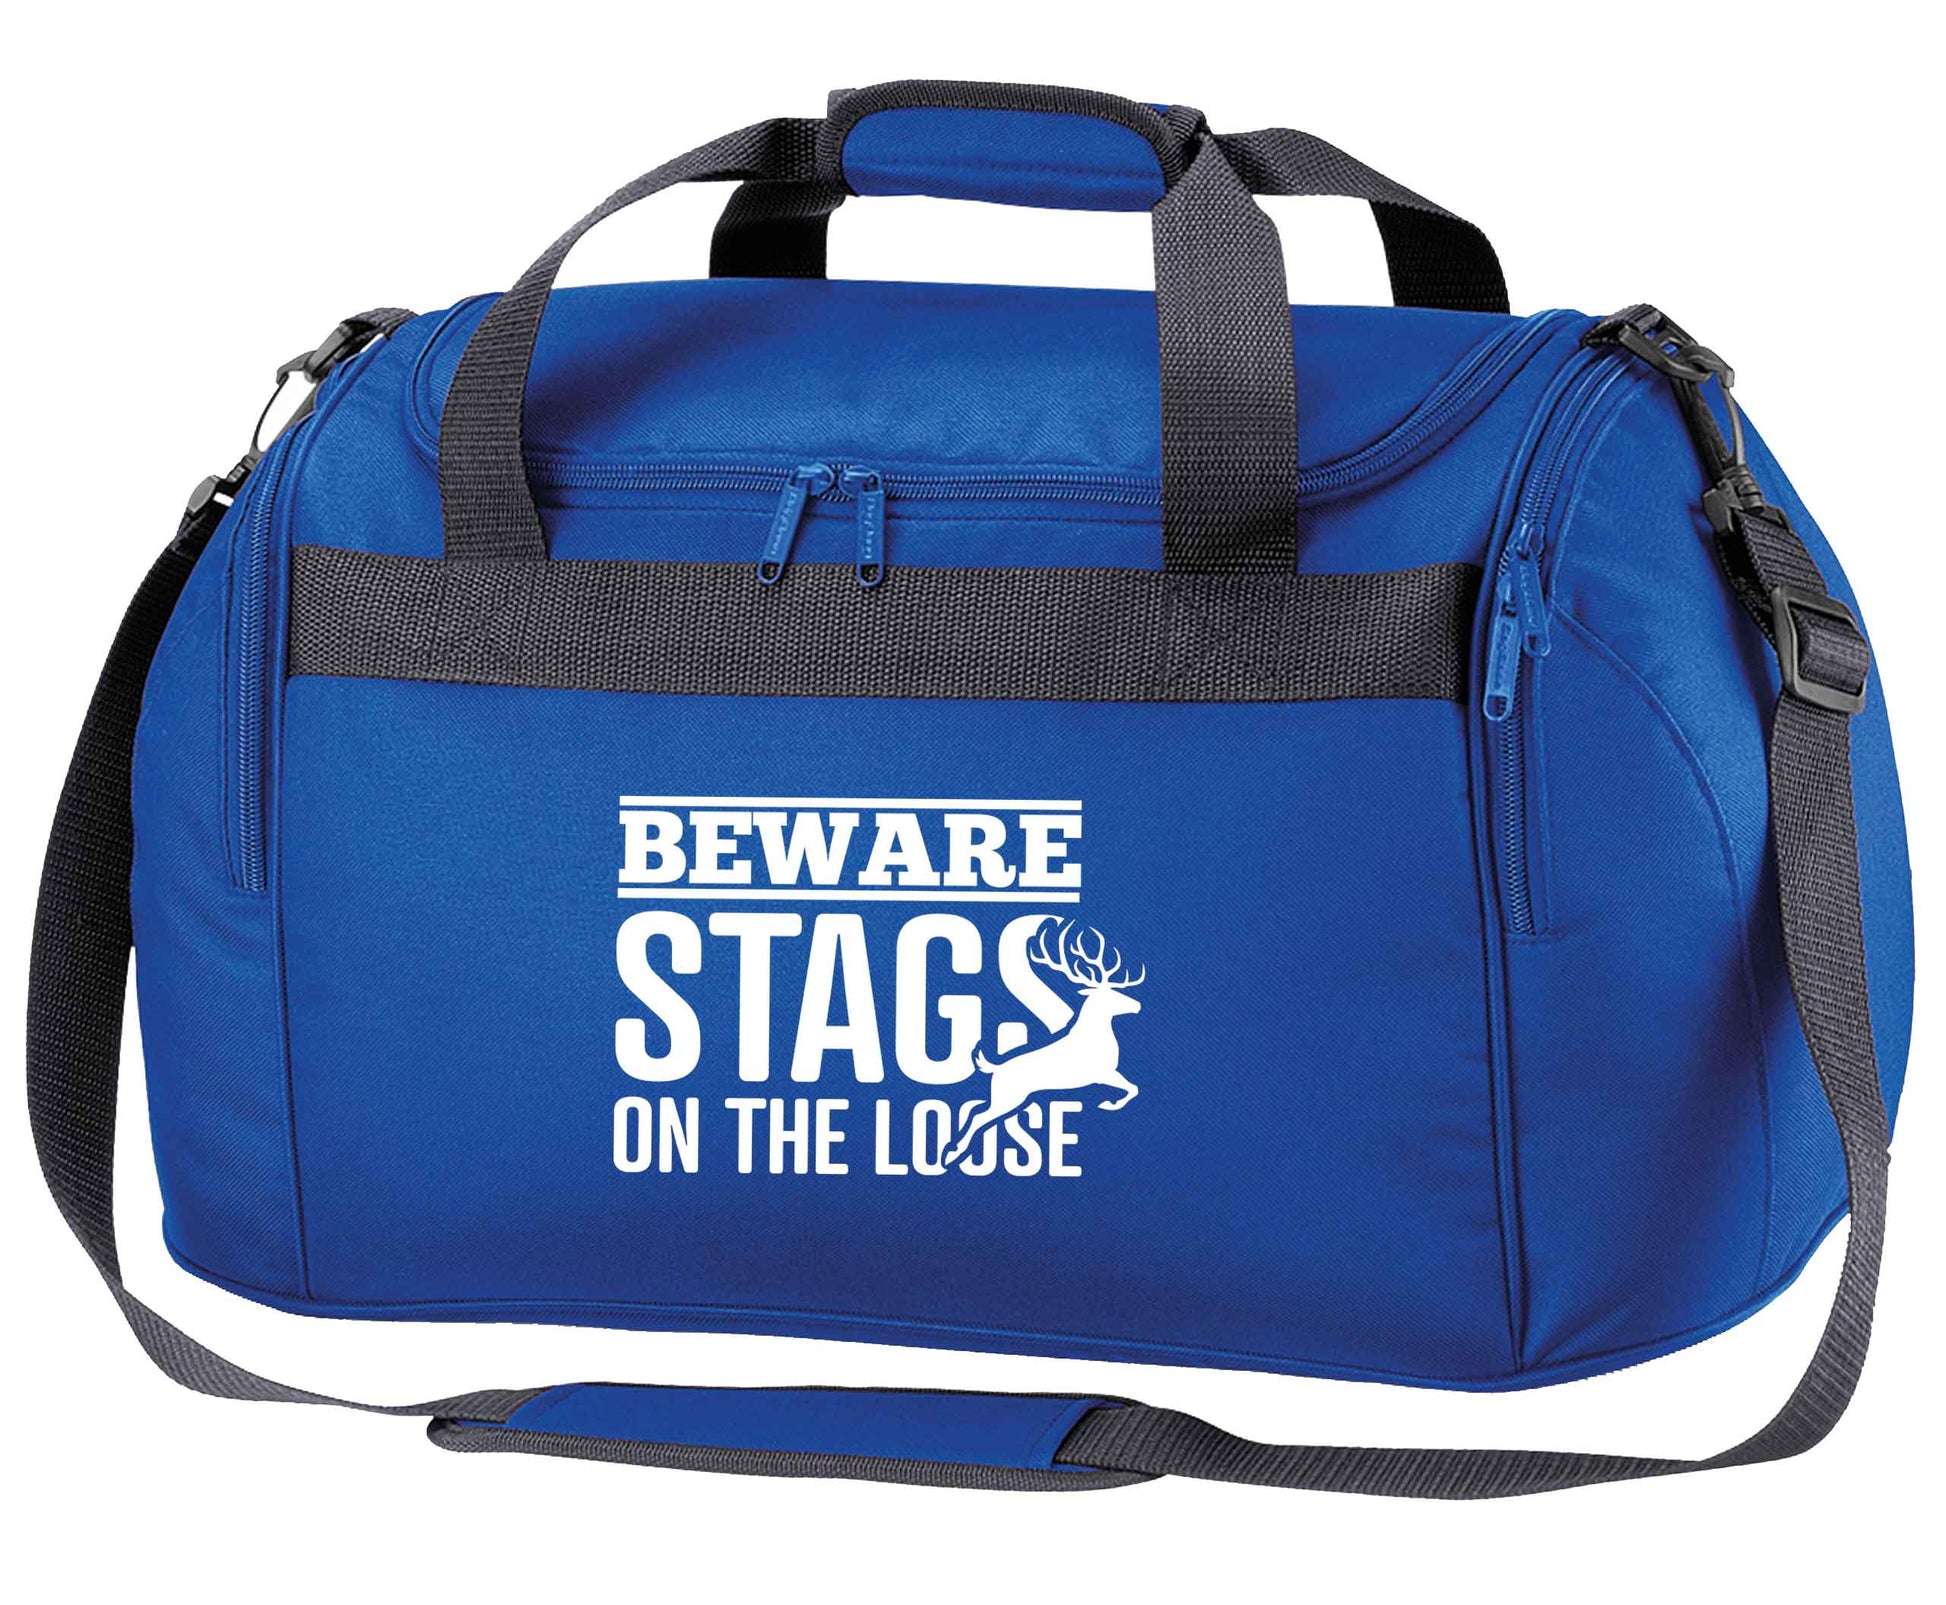 Beware stags on the loose royal blue holdall / duffel bag